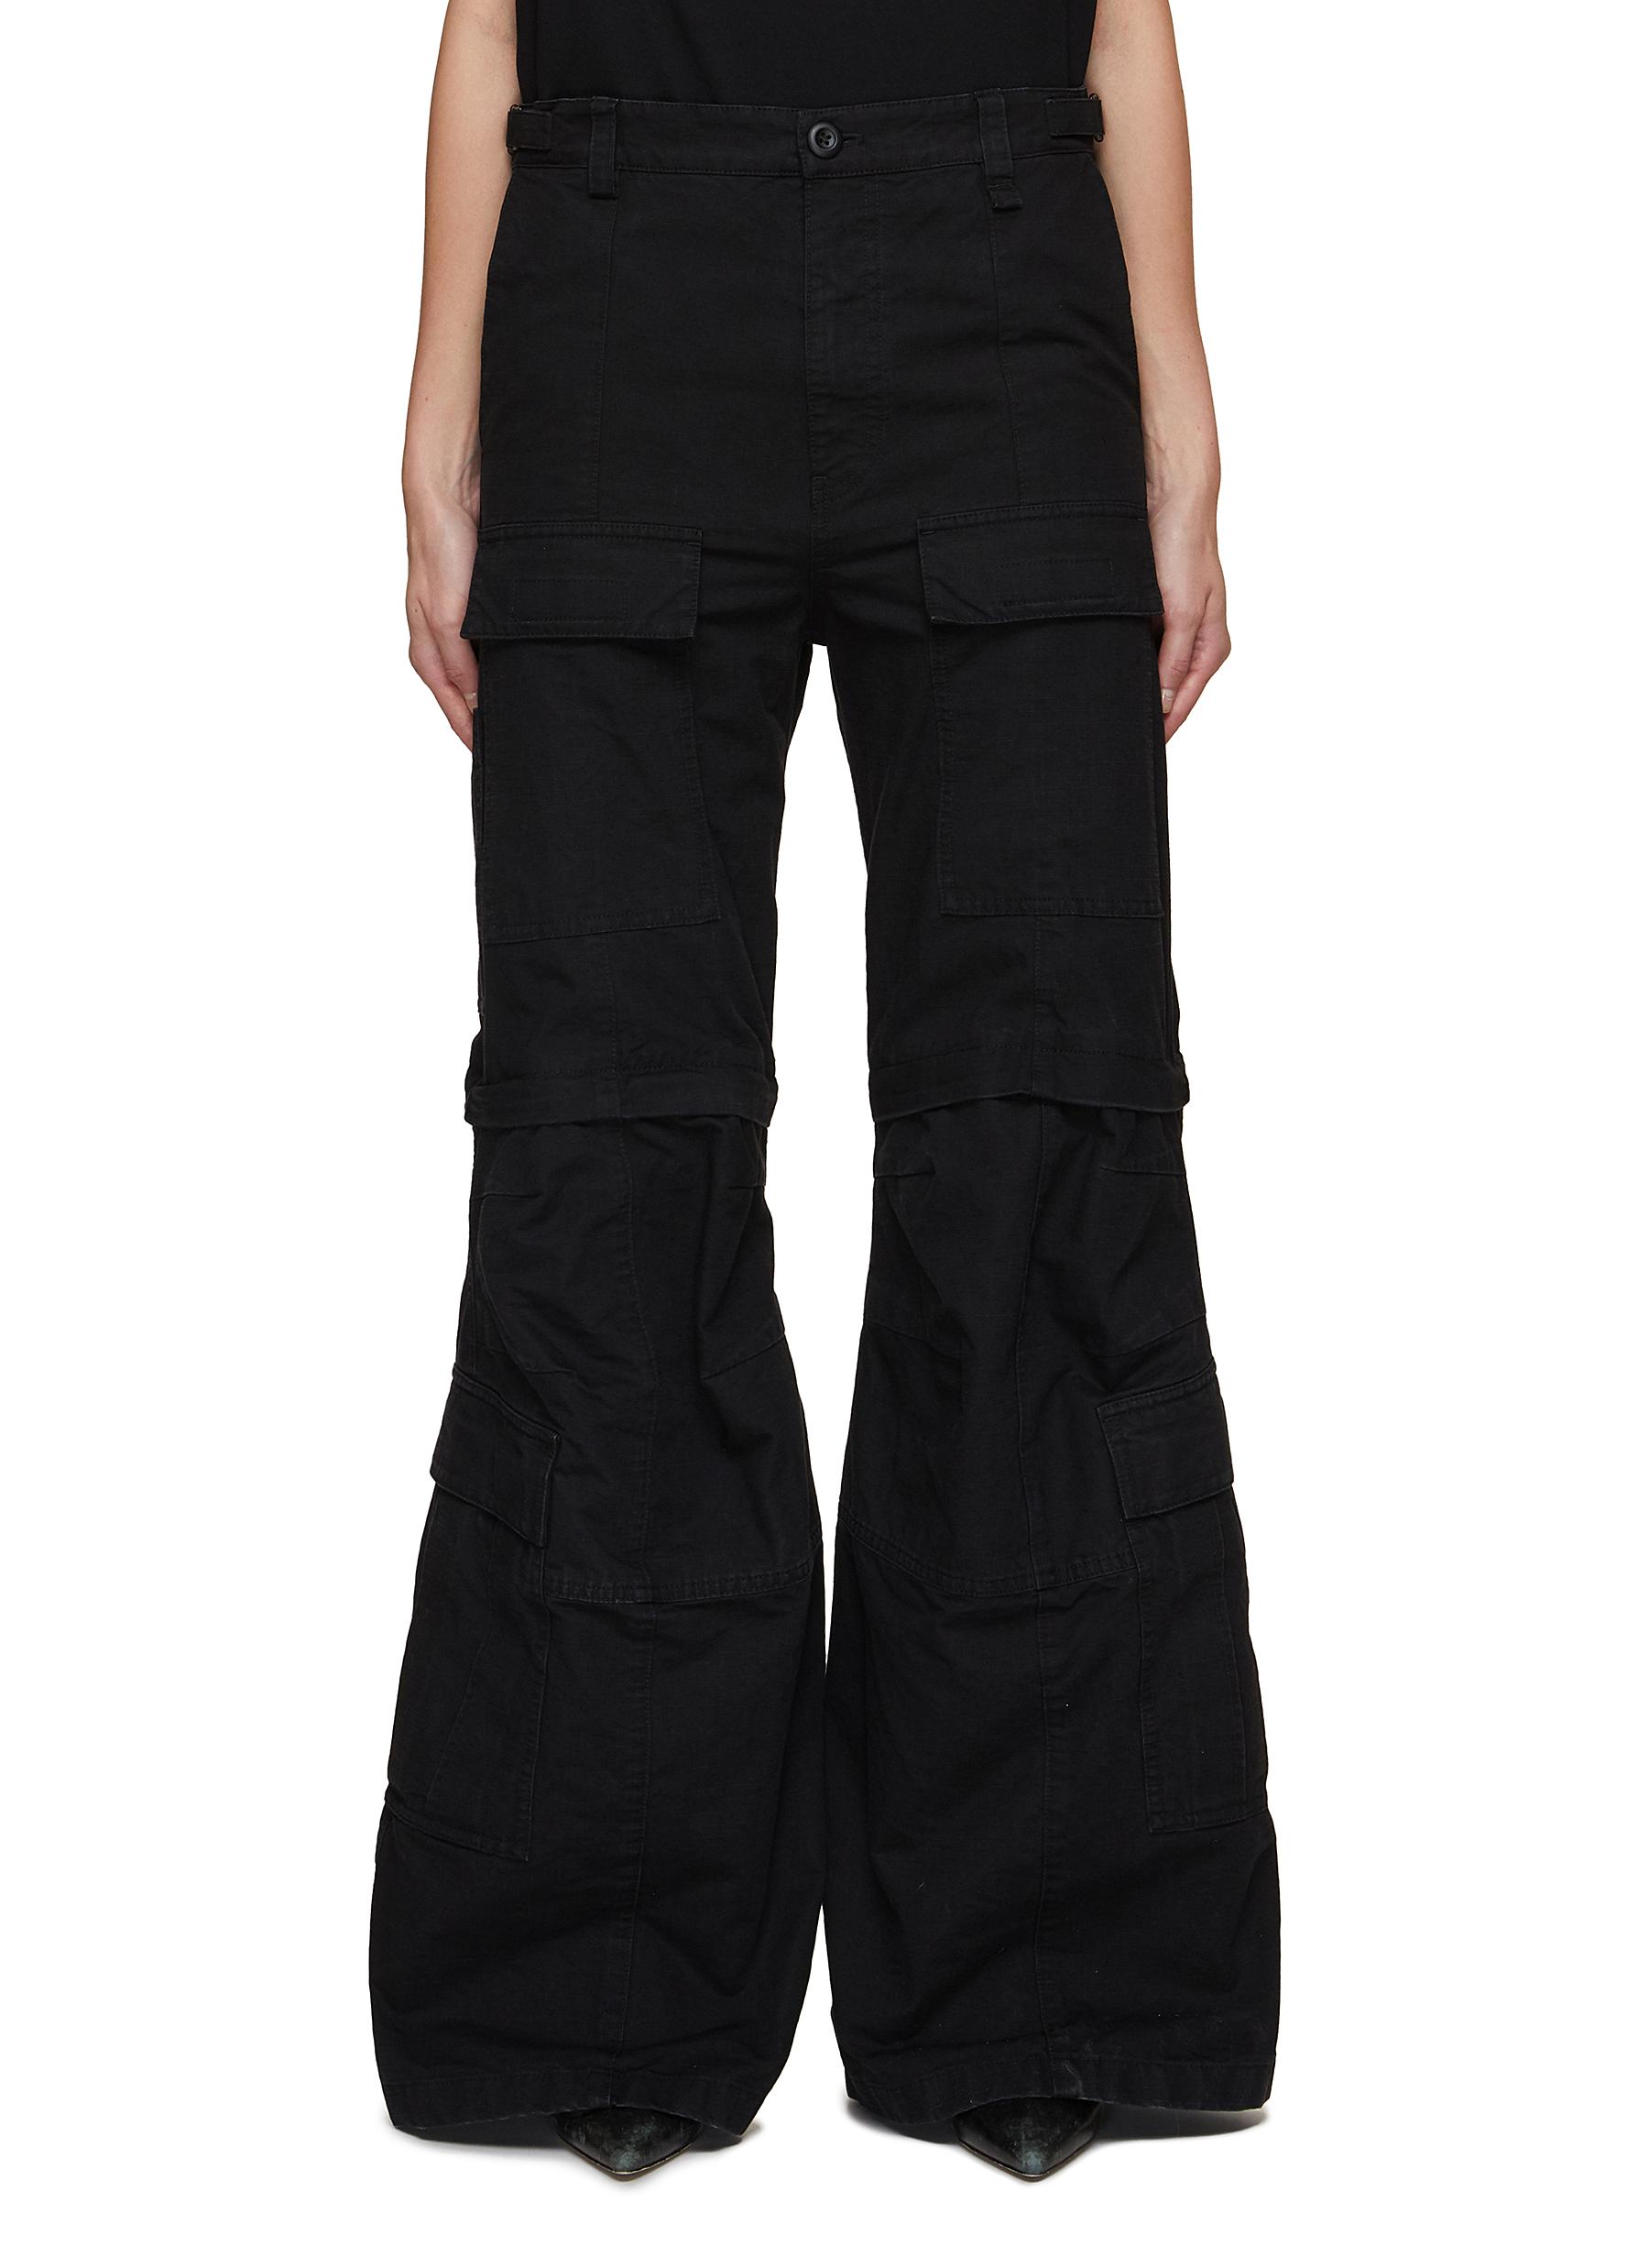 Black Cargo Flare Black Cargo Trousers Womens With Pocket For High